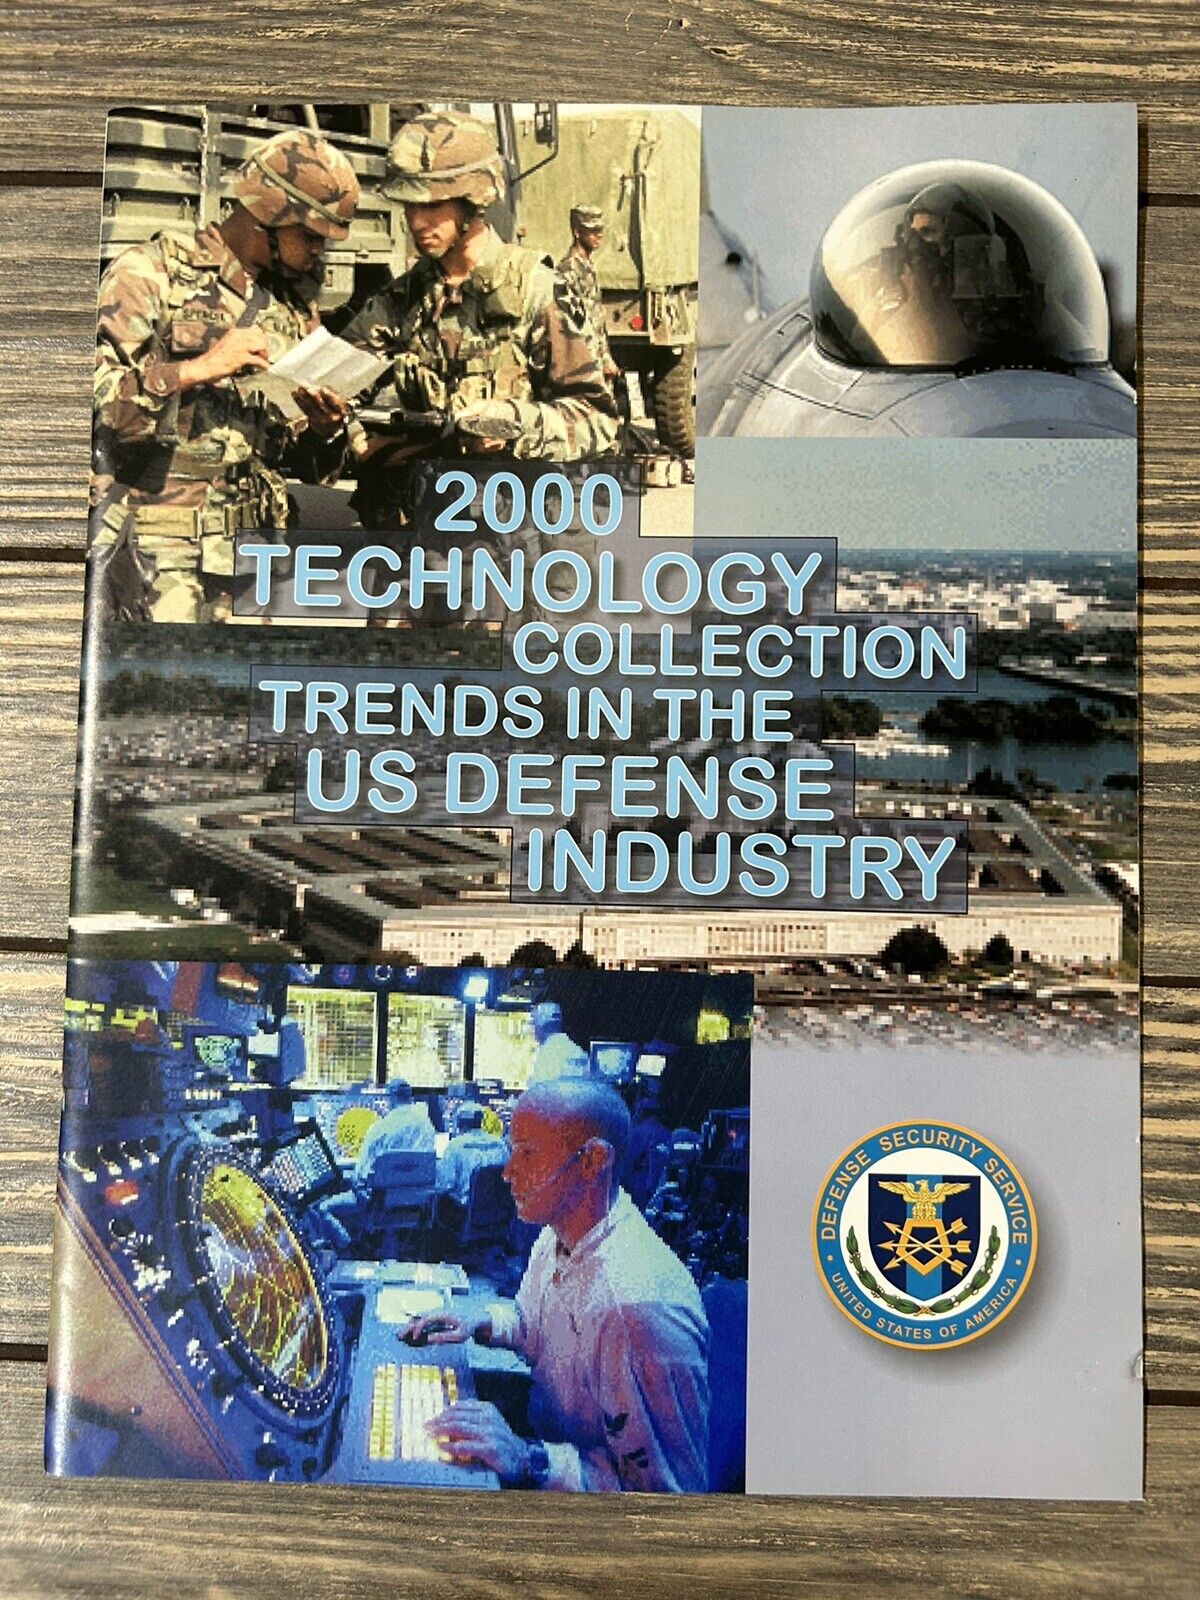 VTG 2000 TECHNOLOGY COLLECTION TRENDS IN THE US DEFENSE INDUSTRY Booklet